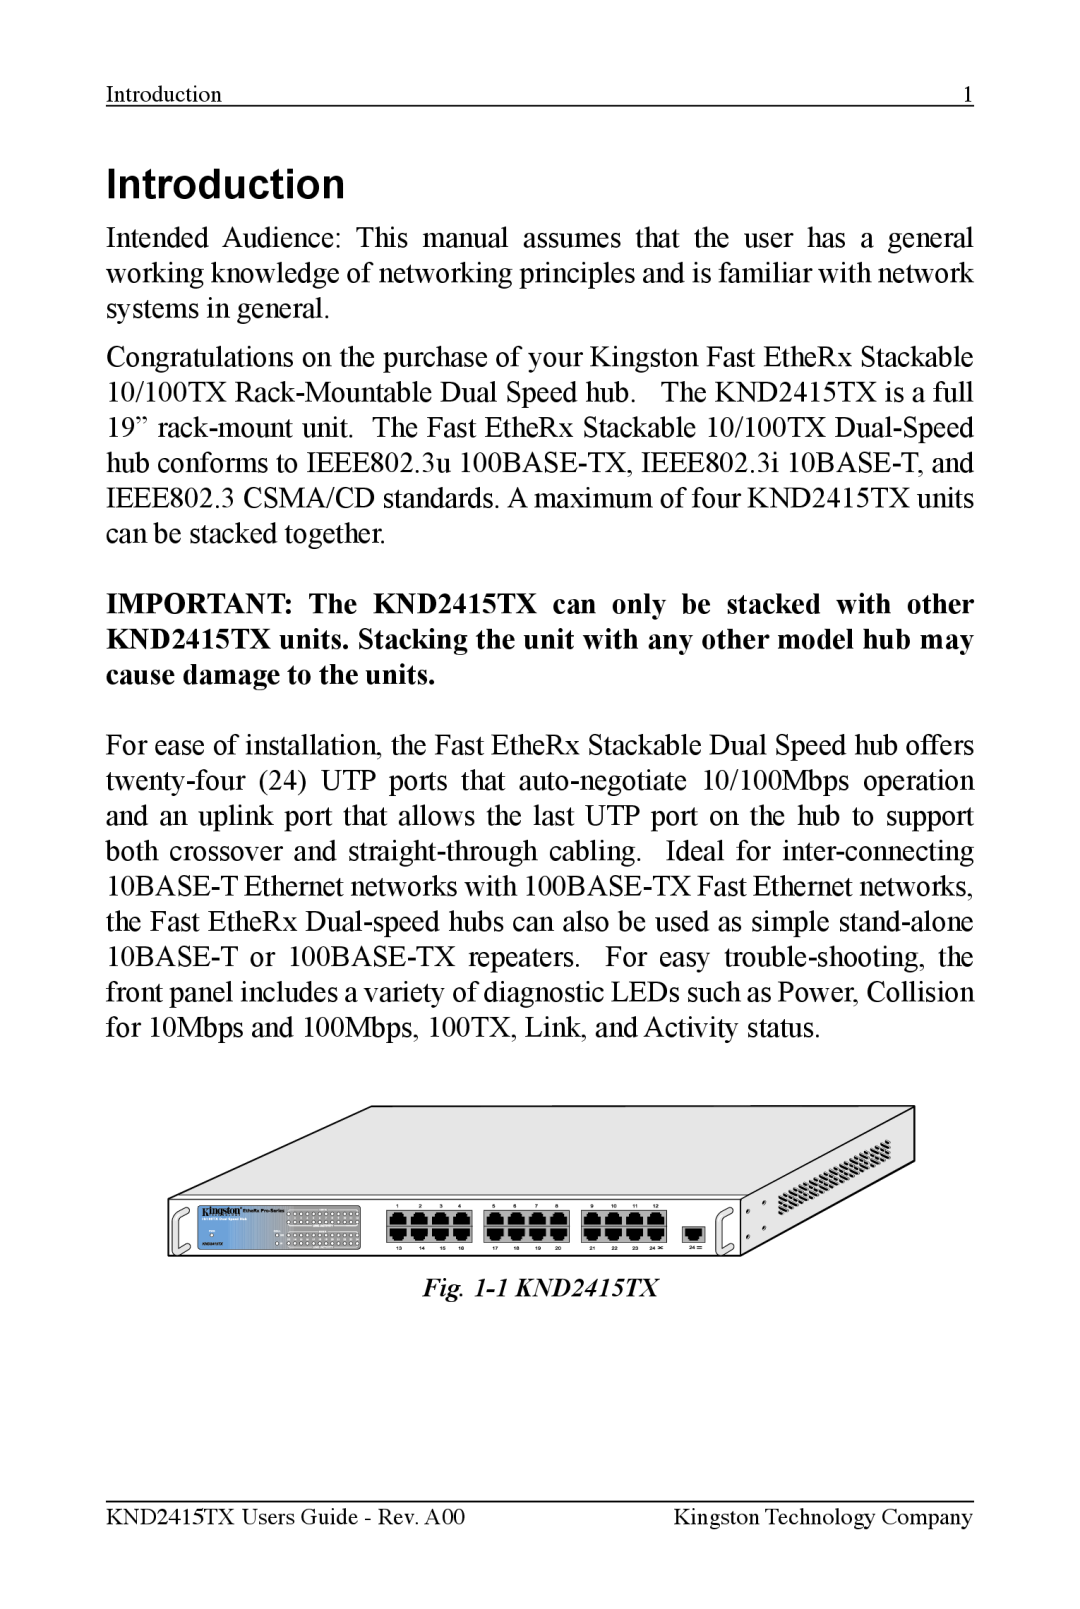 Kingston Technology manual Introduction, 1 KND2415TX 